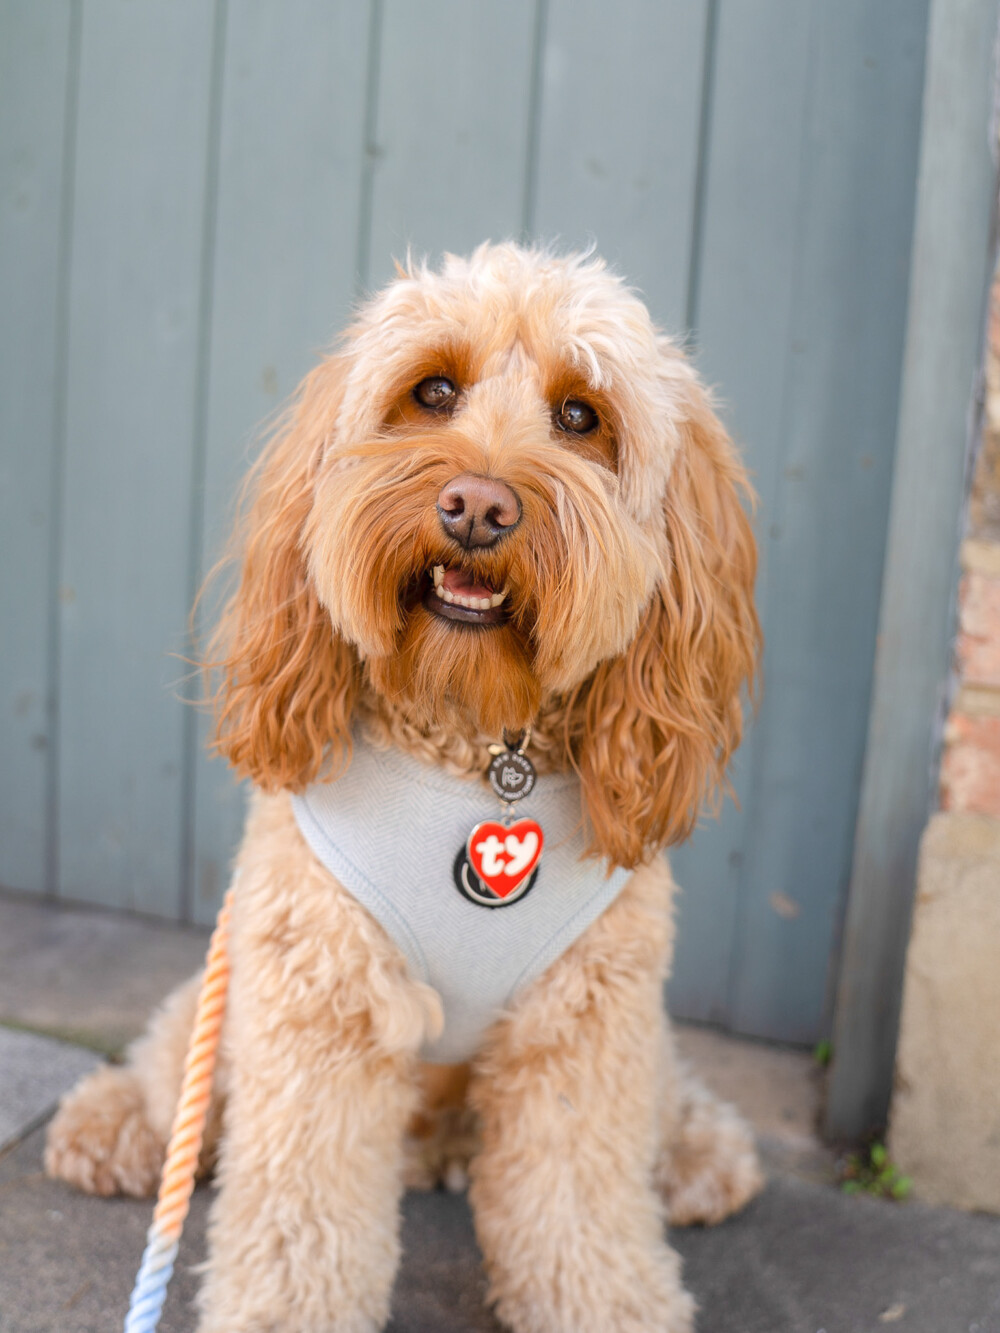 A cockapoo wearing a cute blue harness and TY tag